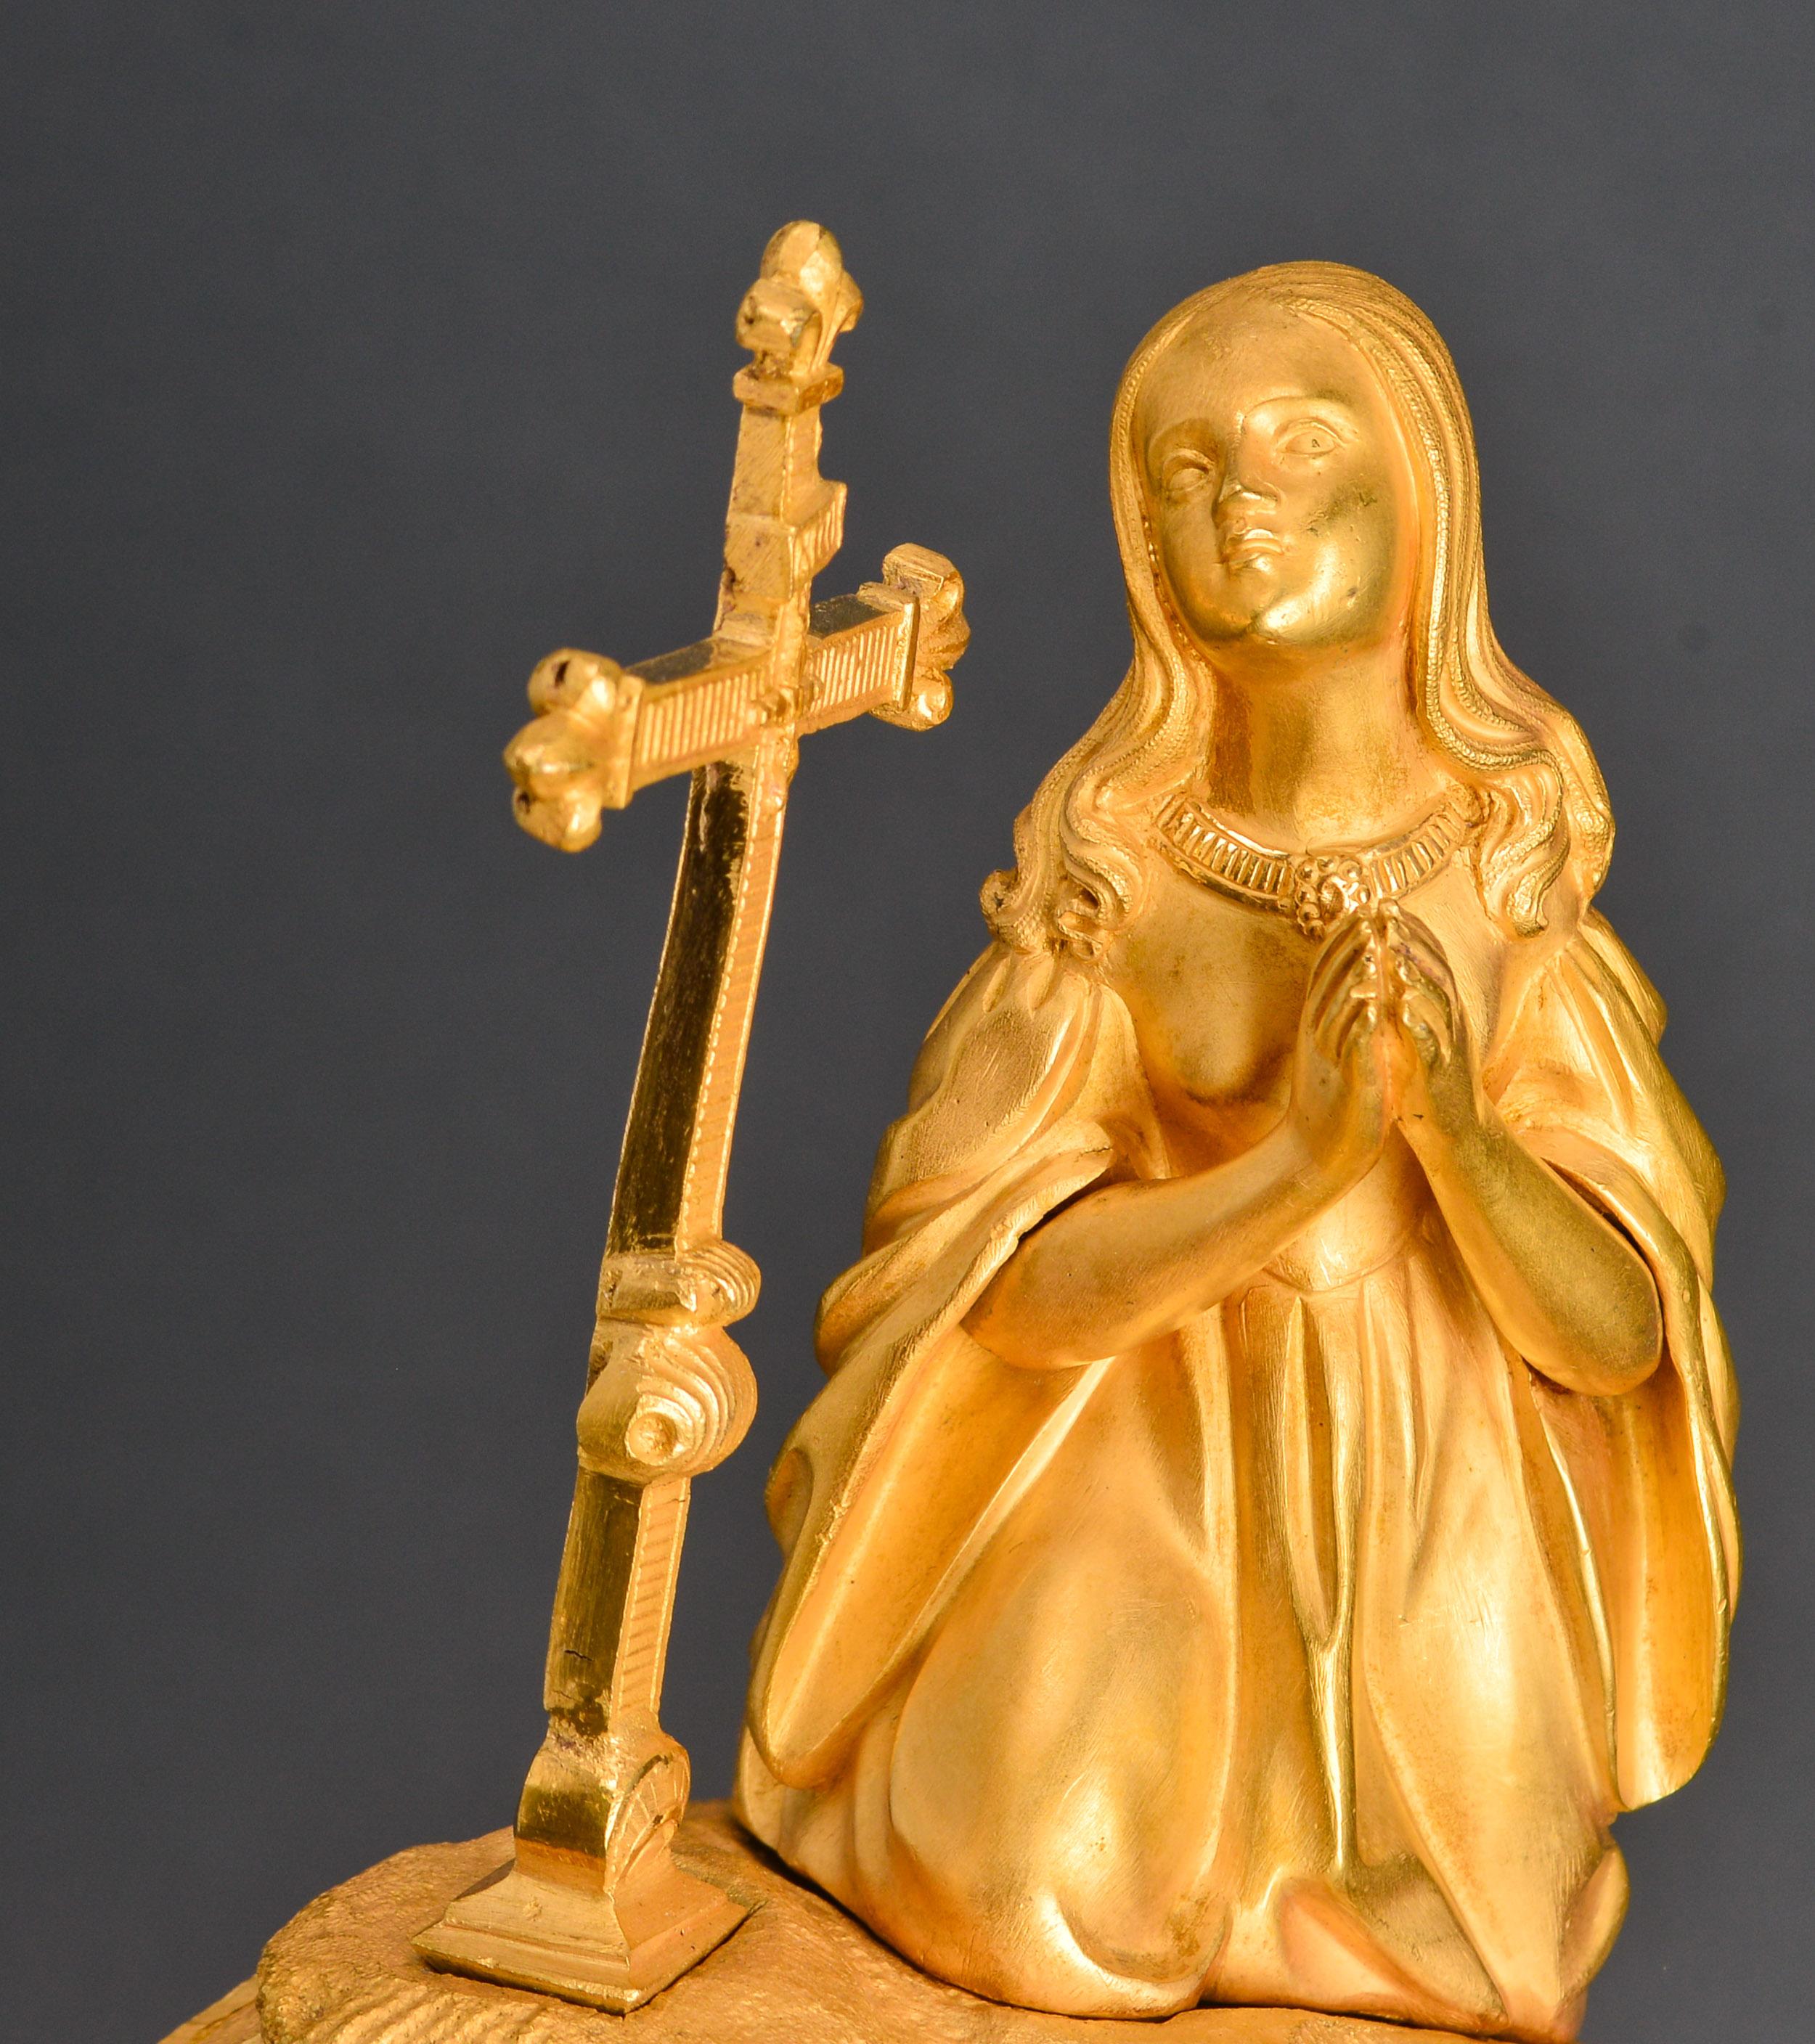 19th Century French Dore Bronze Mantel Clock with Woman in Prayer